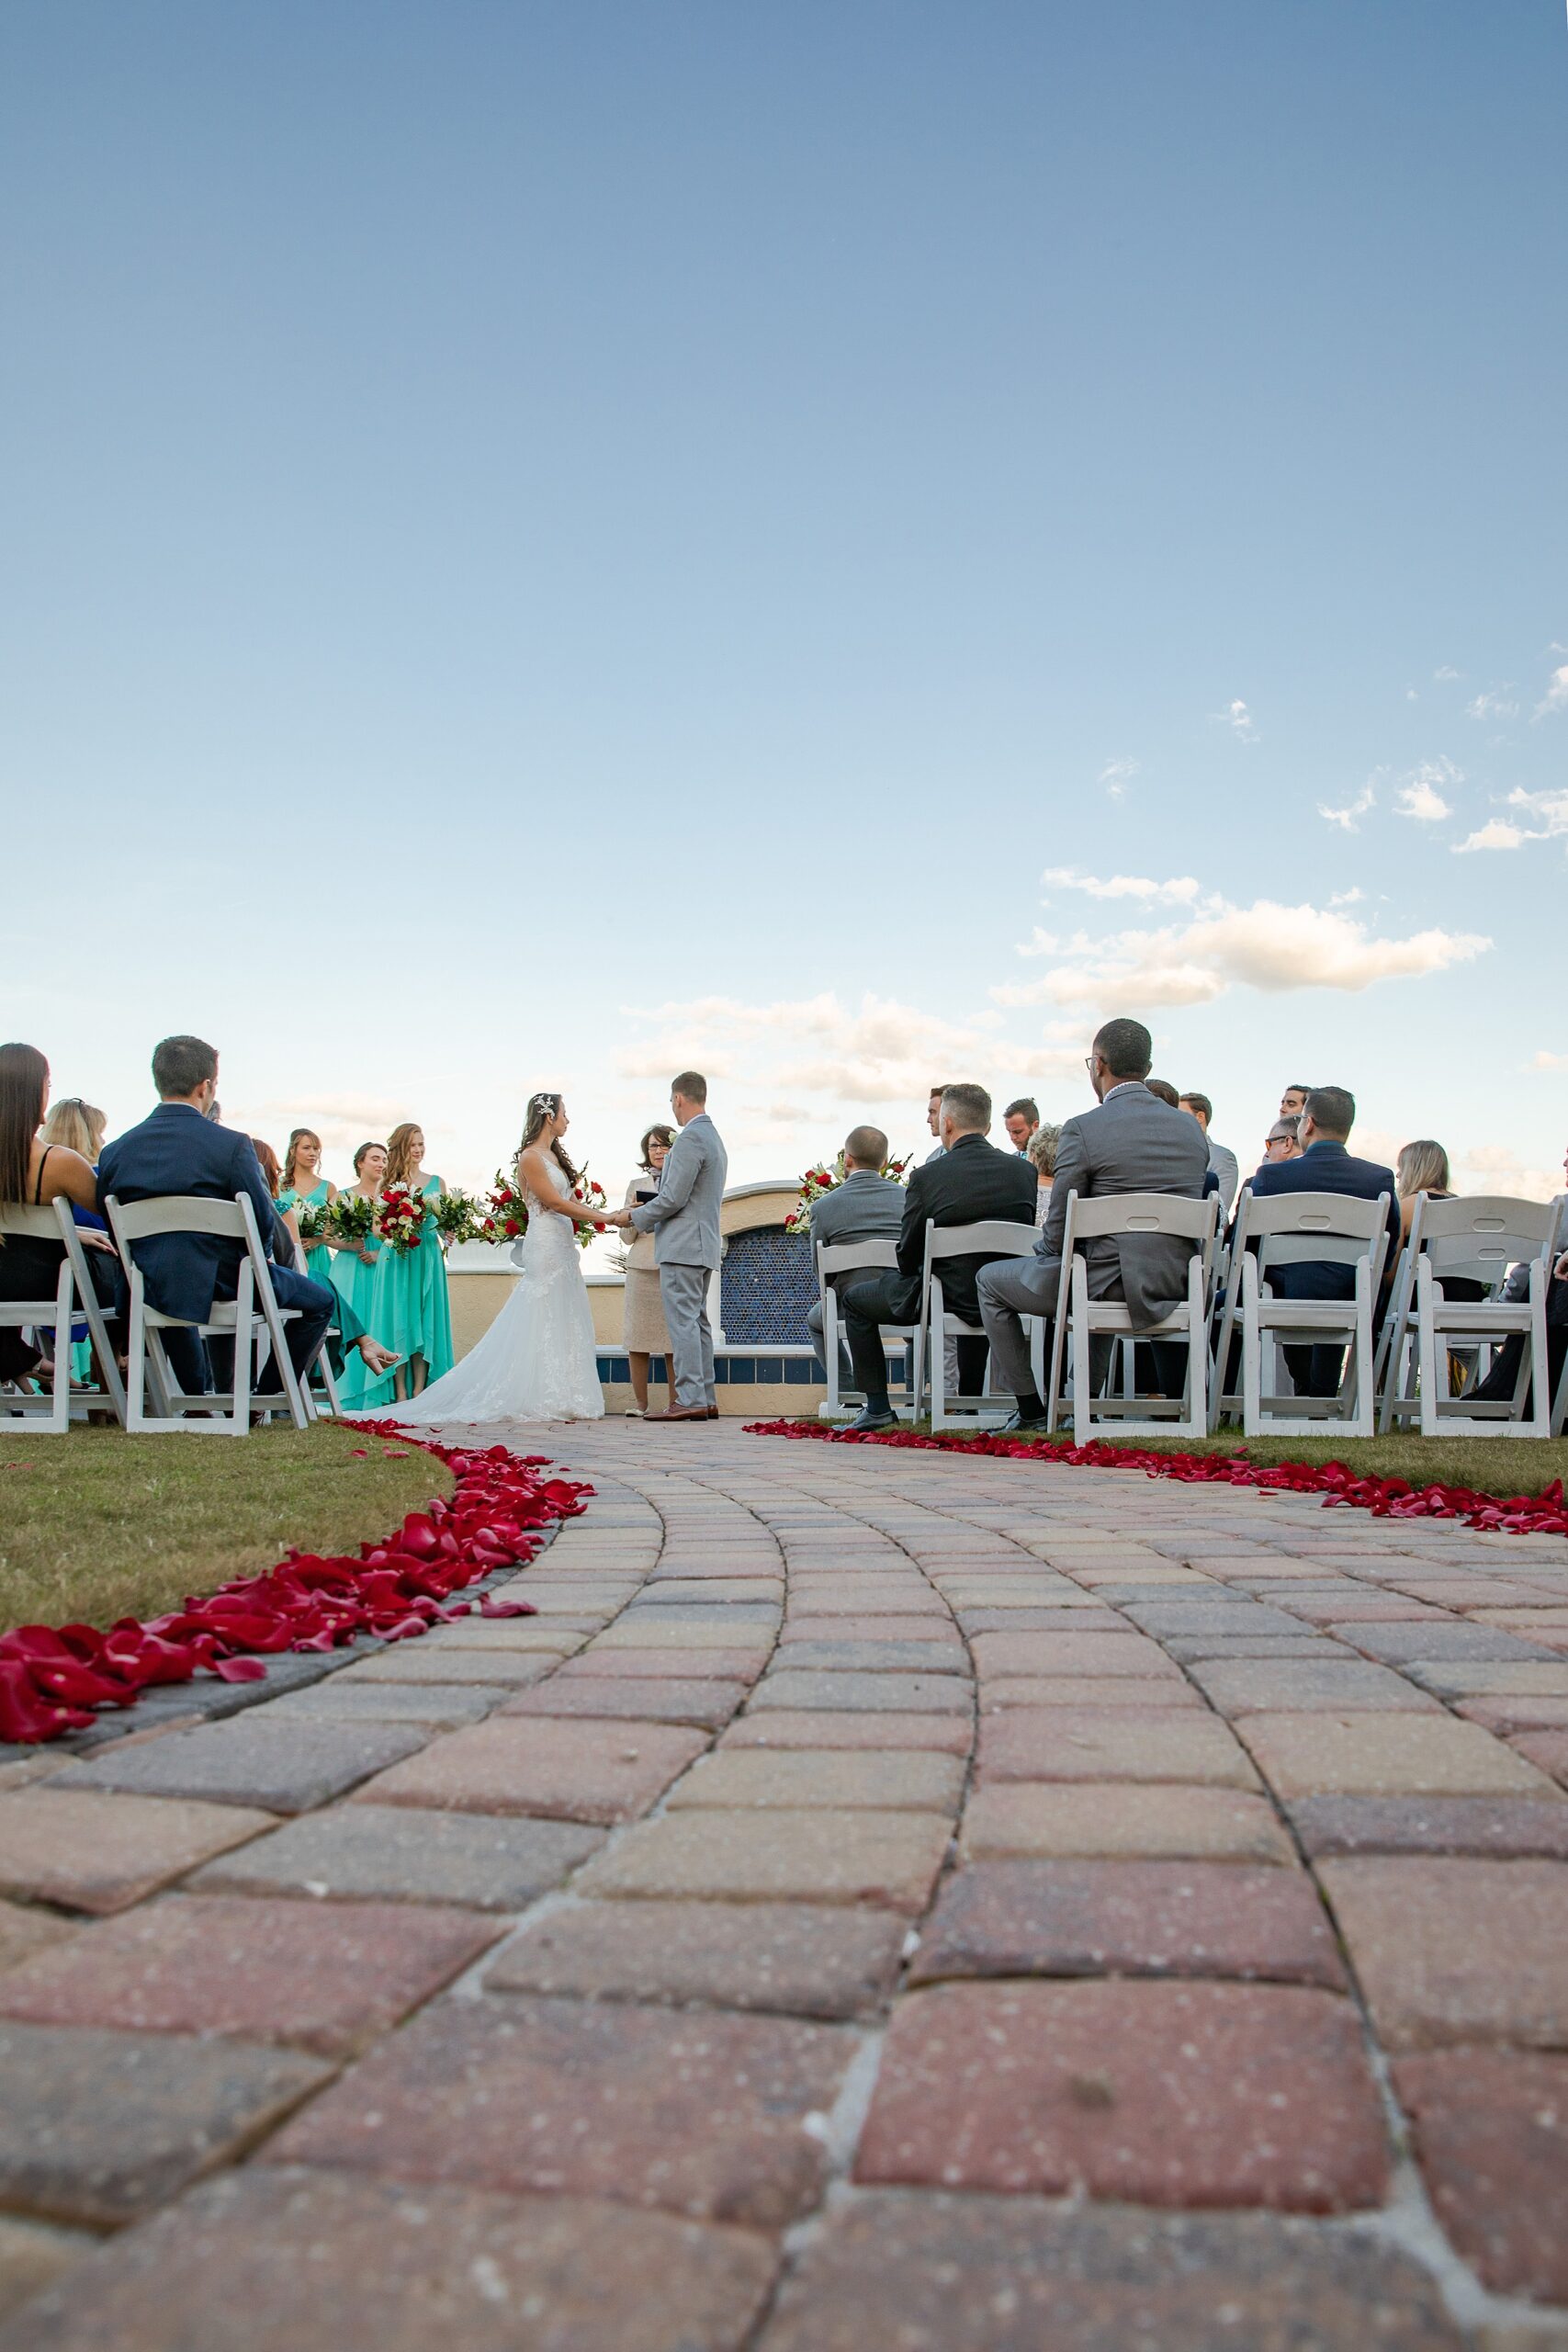 A view up the aisle at a wedding ceremony on a brick lined path